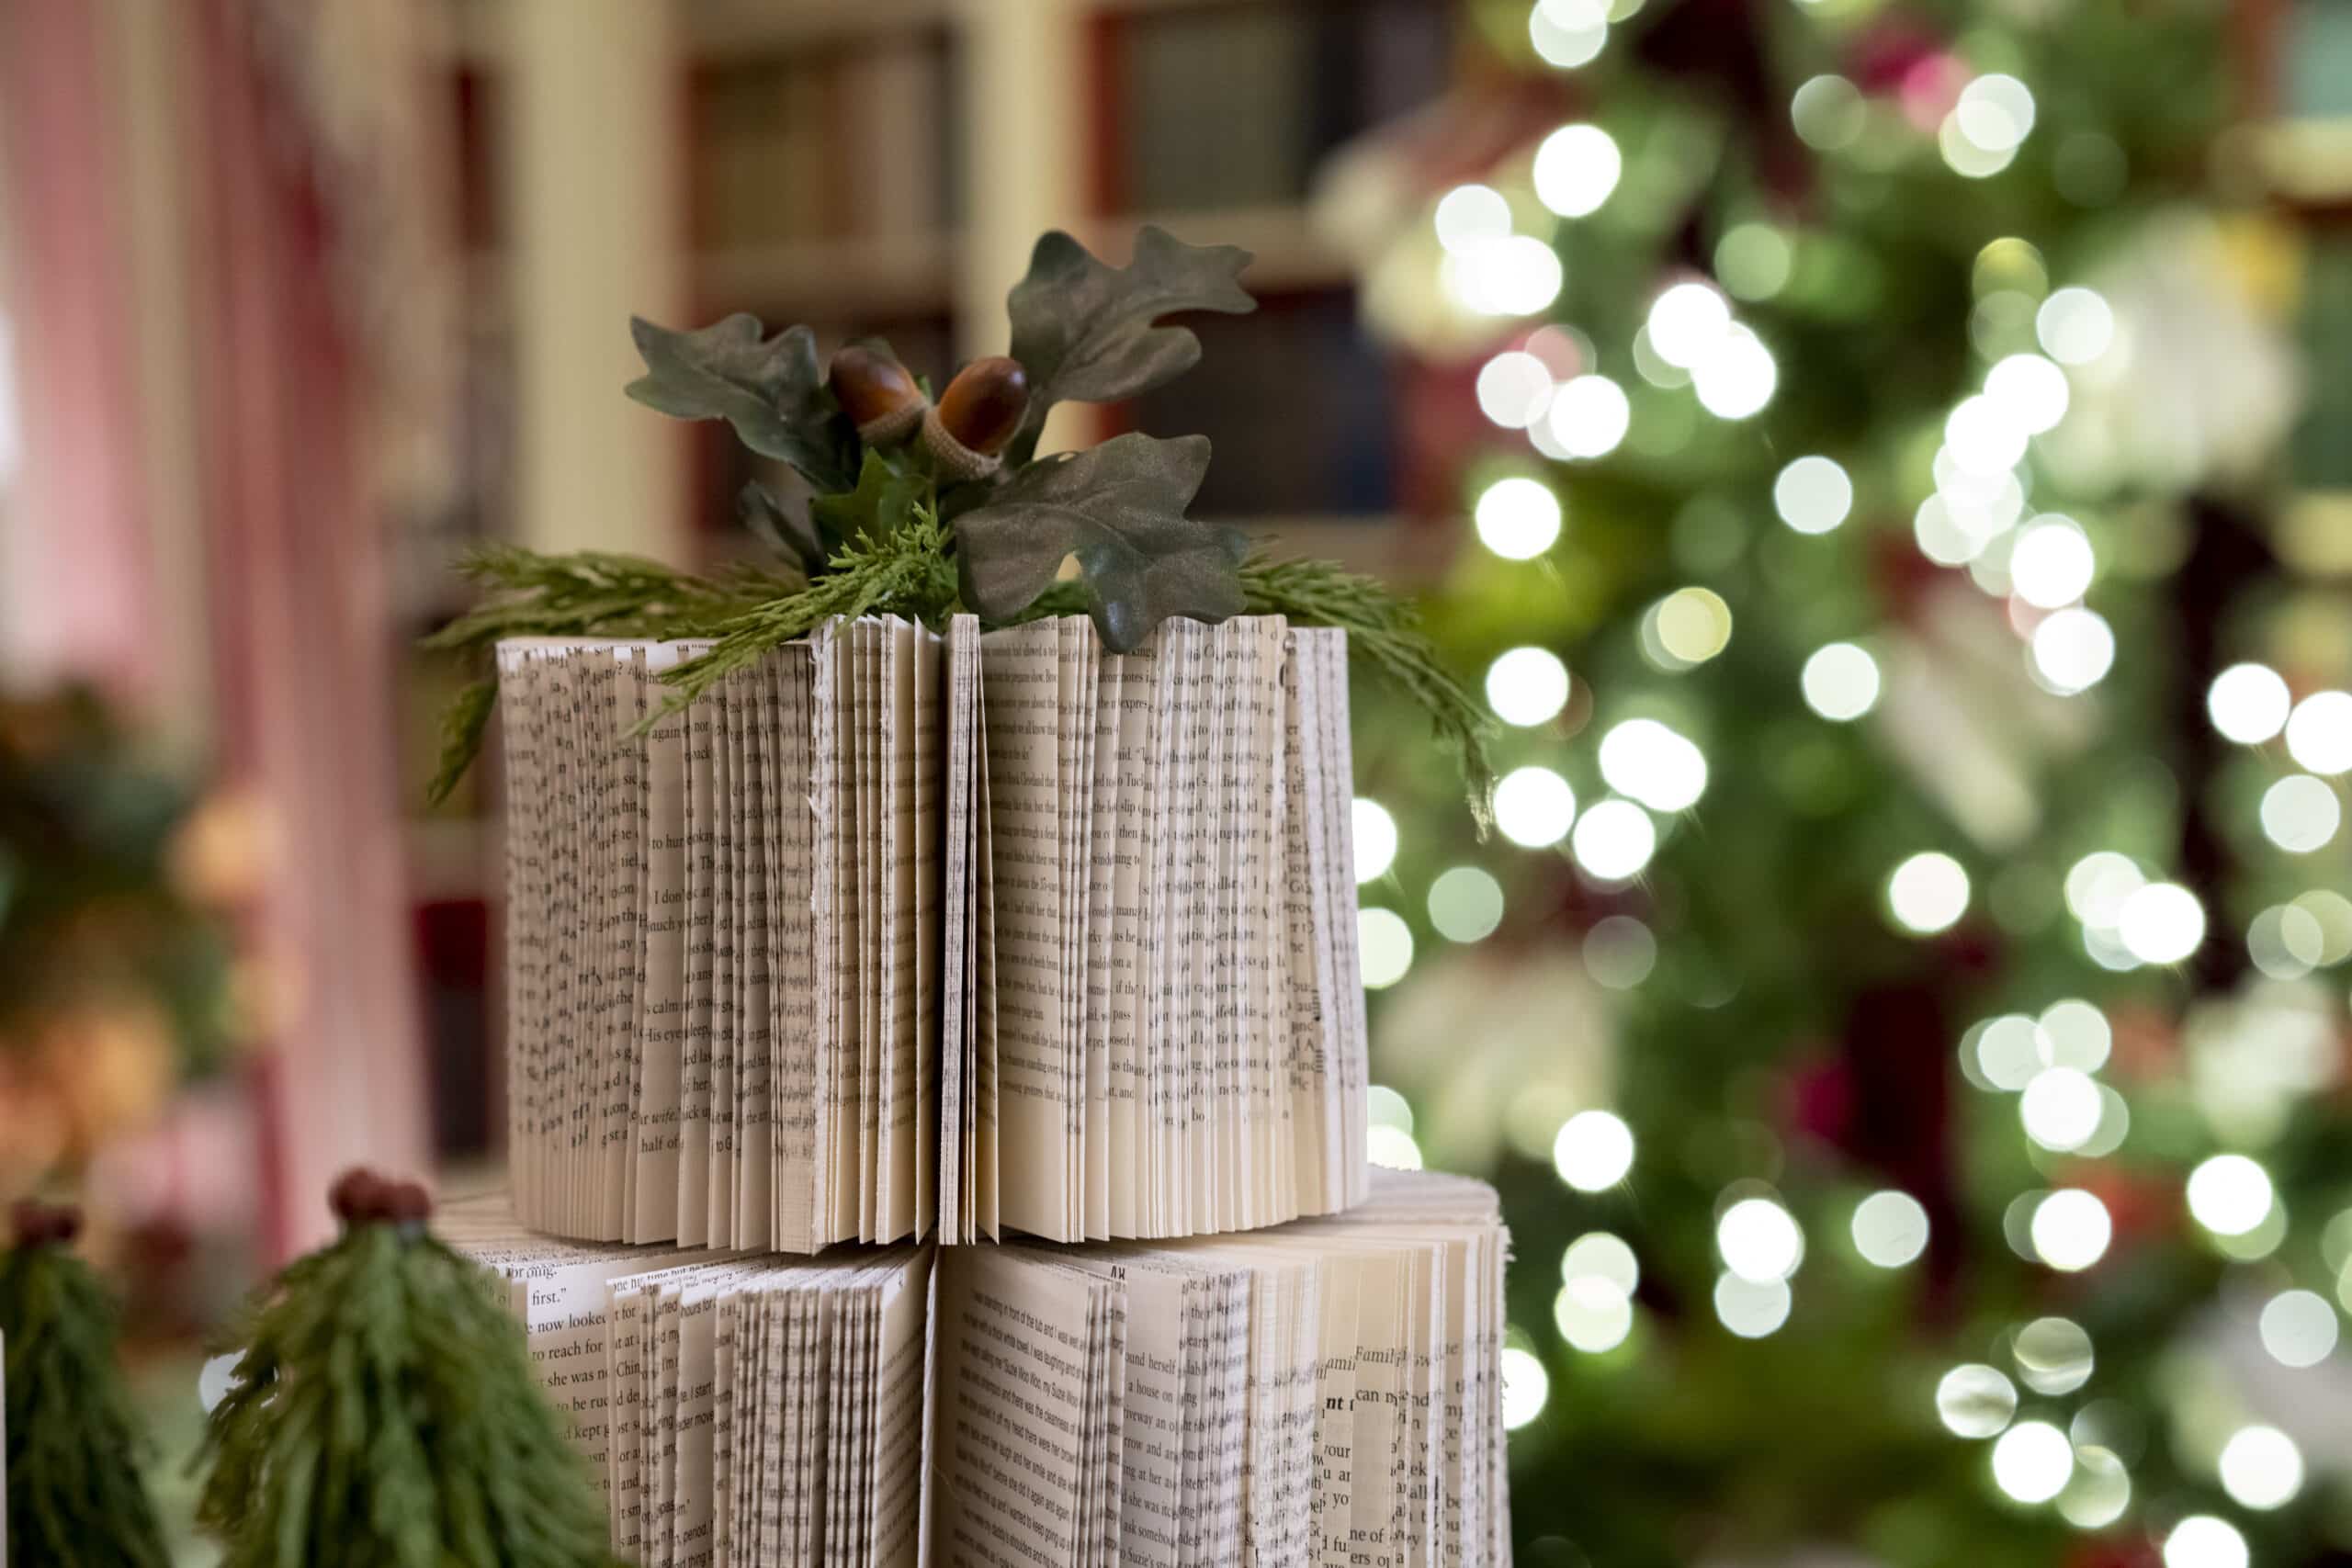 How to make the book trees from the 2022 White House Library holiday decorations